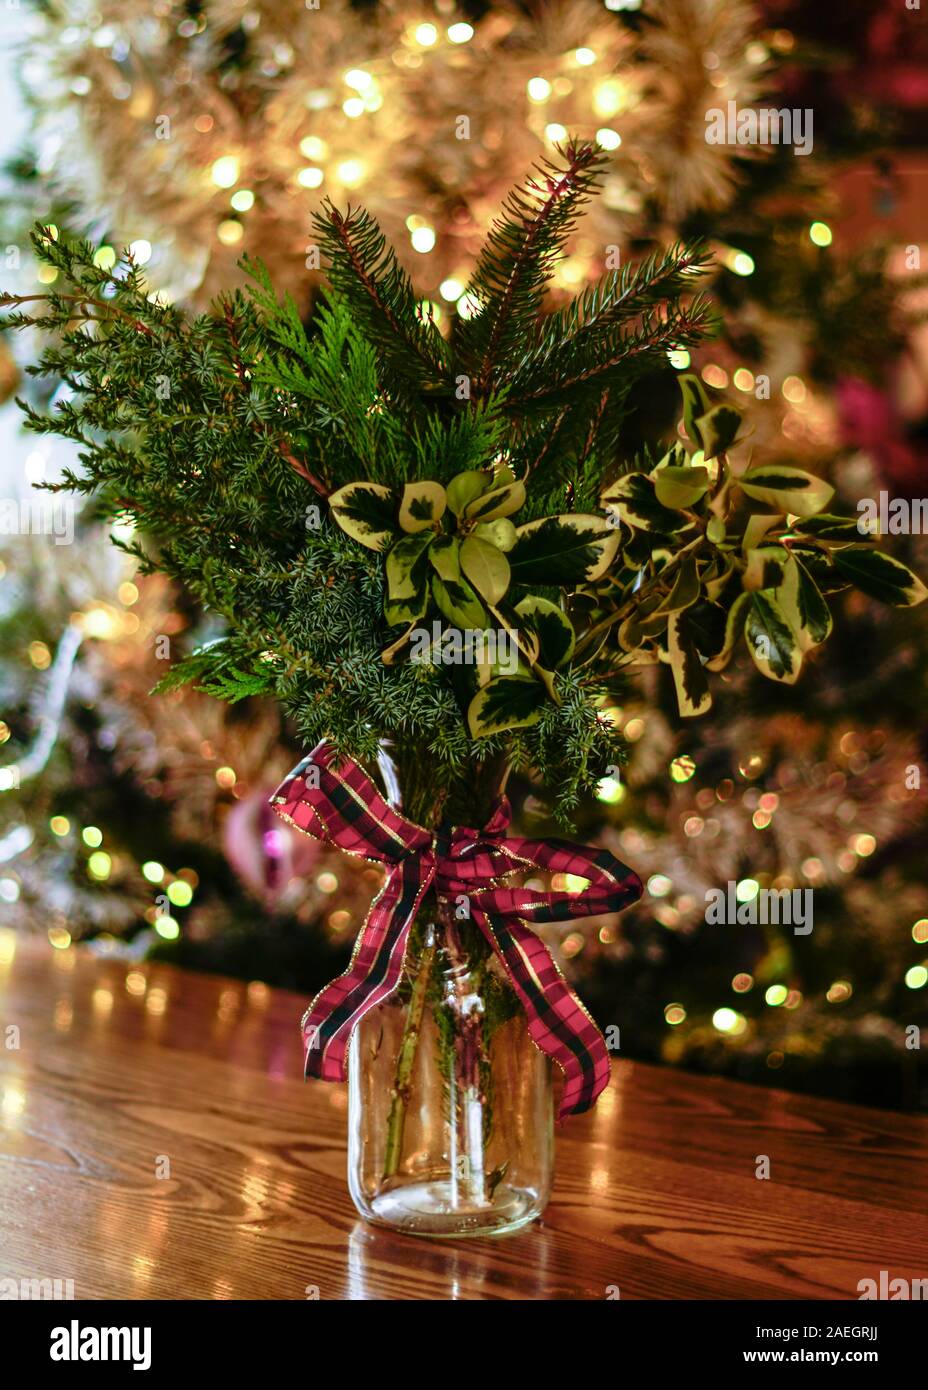 Natural Christmas decorations indoors Stock Photo - Alamy